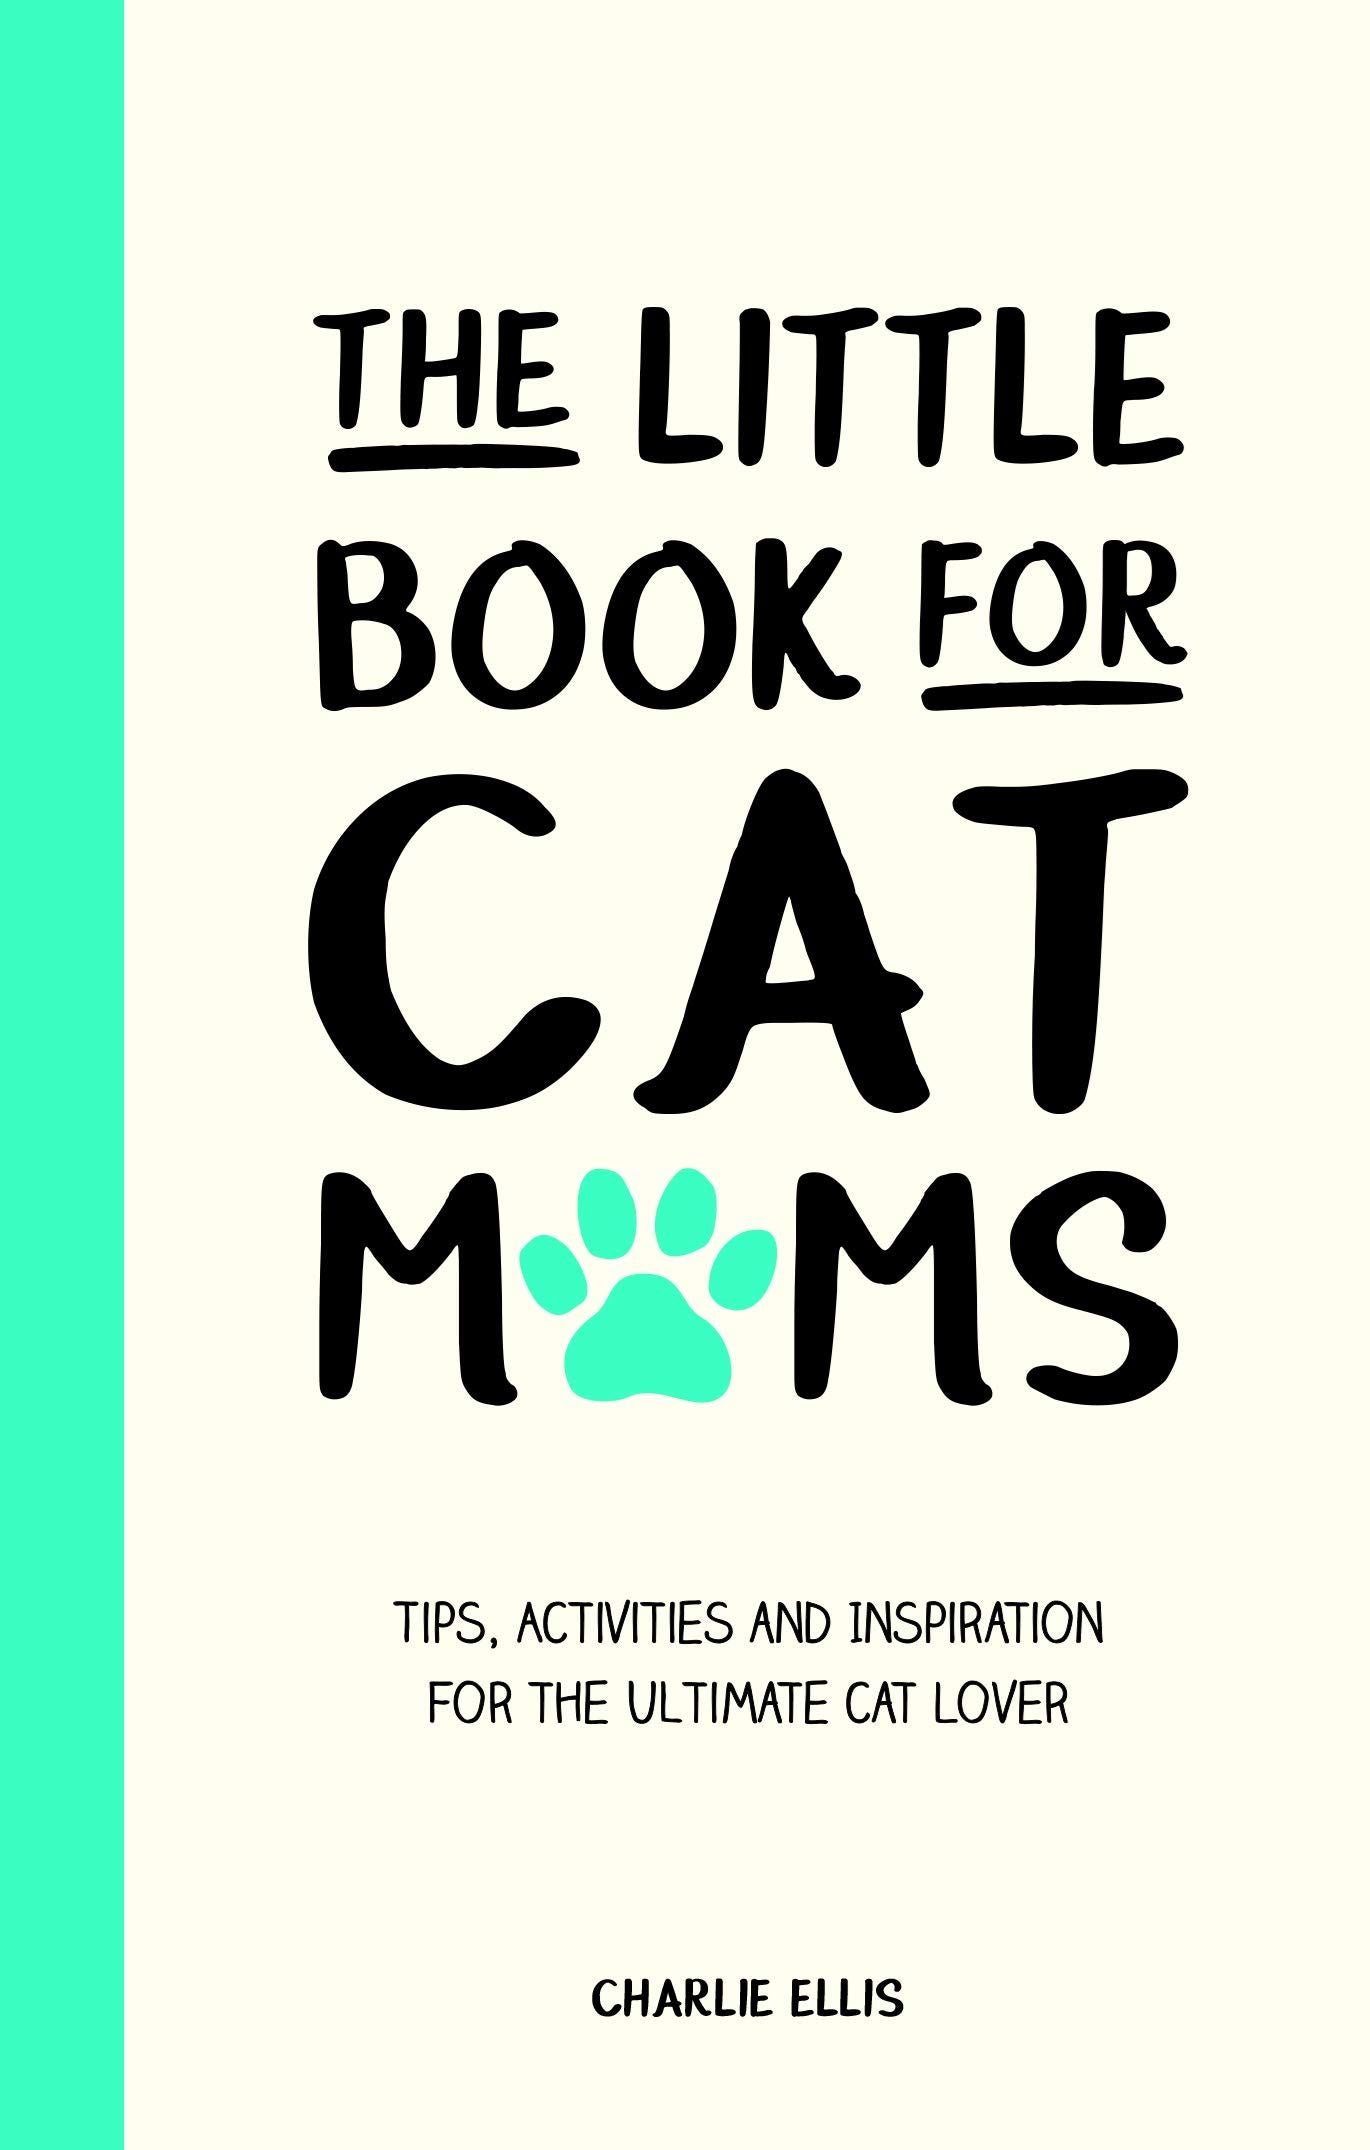 They’re furry, they’re purry, and they’re the ultimate cuddly companion. This cat-pendium of epic purr-portions celebrates your feline to the fullest with trivia and puzzles, quotations and crafts, care tips and nifty ways to make your kitty happy. Little book for cat mums